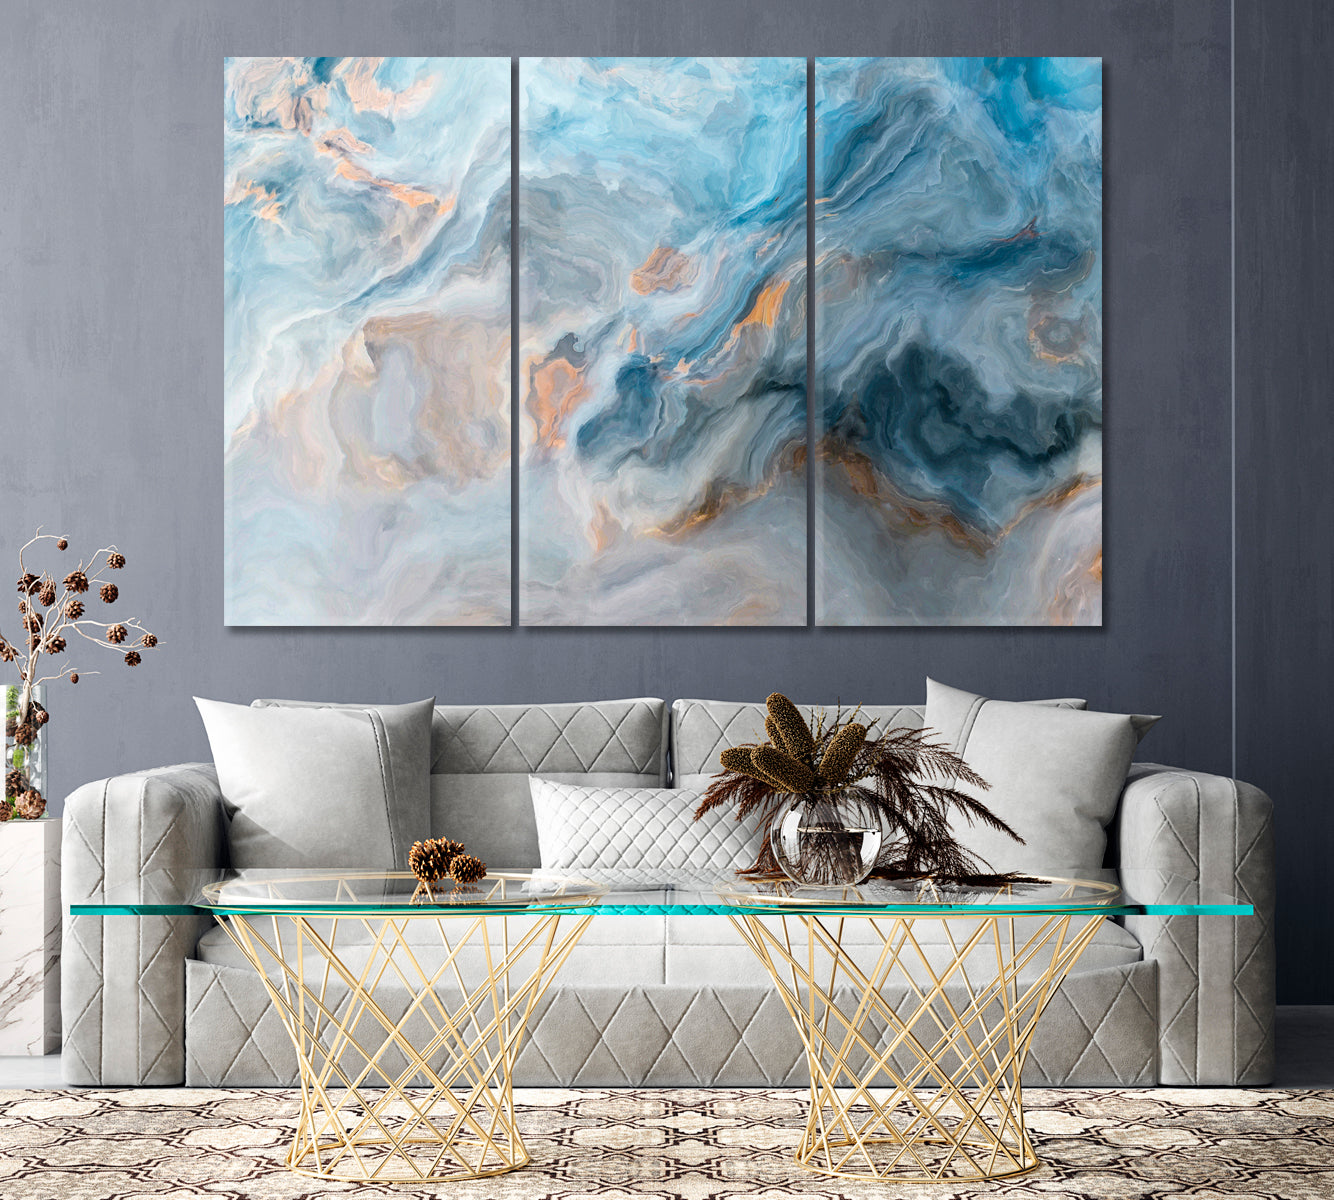 Blue Marble Wavy Pattern Canvas Print ArtLexy 3 Panels 36"x24" inches 